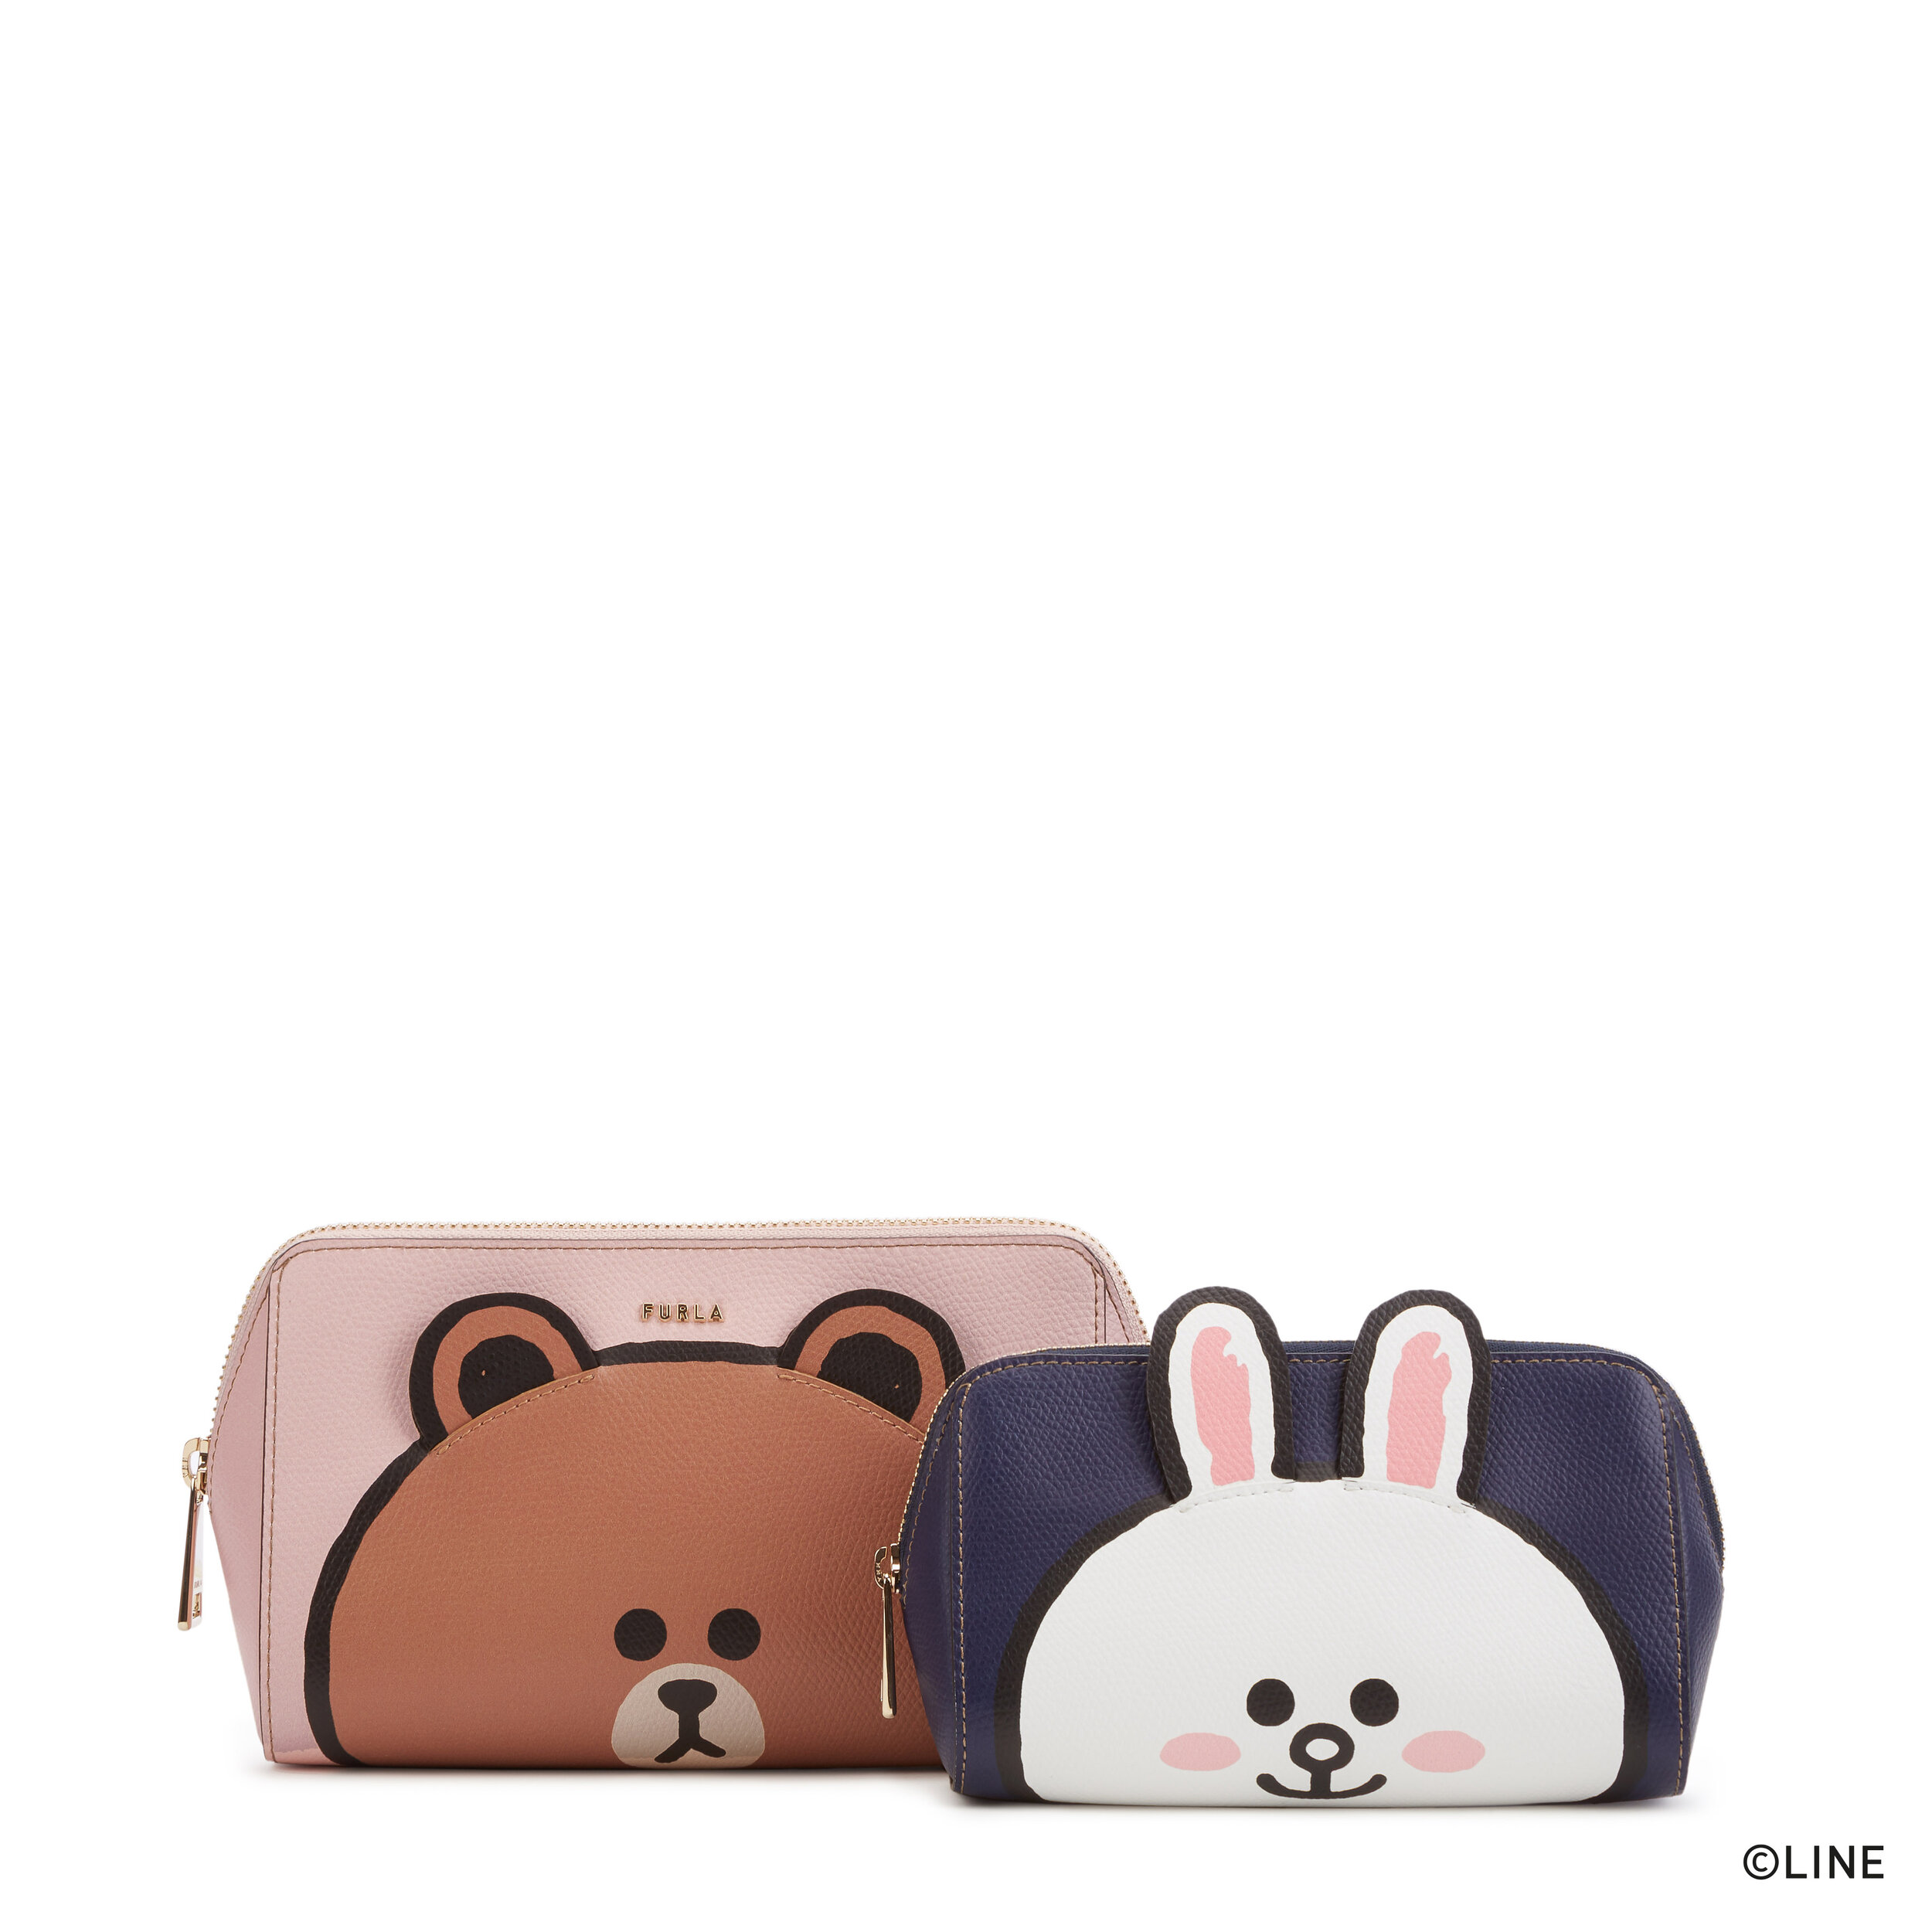 FURLA LINE FRIENDS M COSMETIC CASE SET_BOWN_CONY PRINT ON ARES TEXTURED LEATHER_LF-copyright.jpg